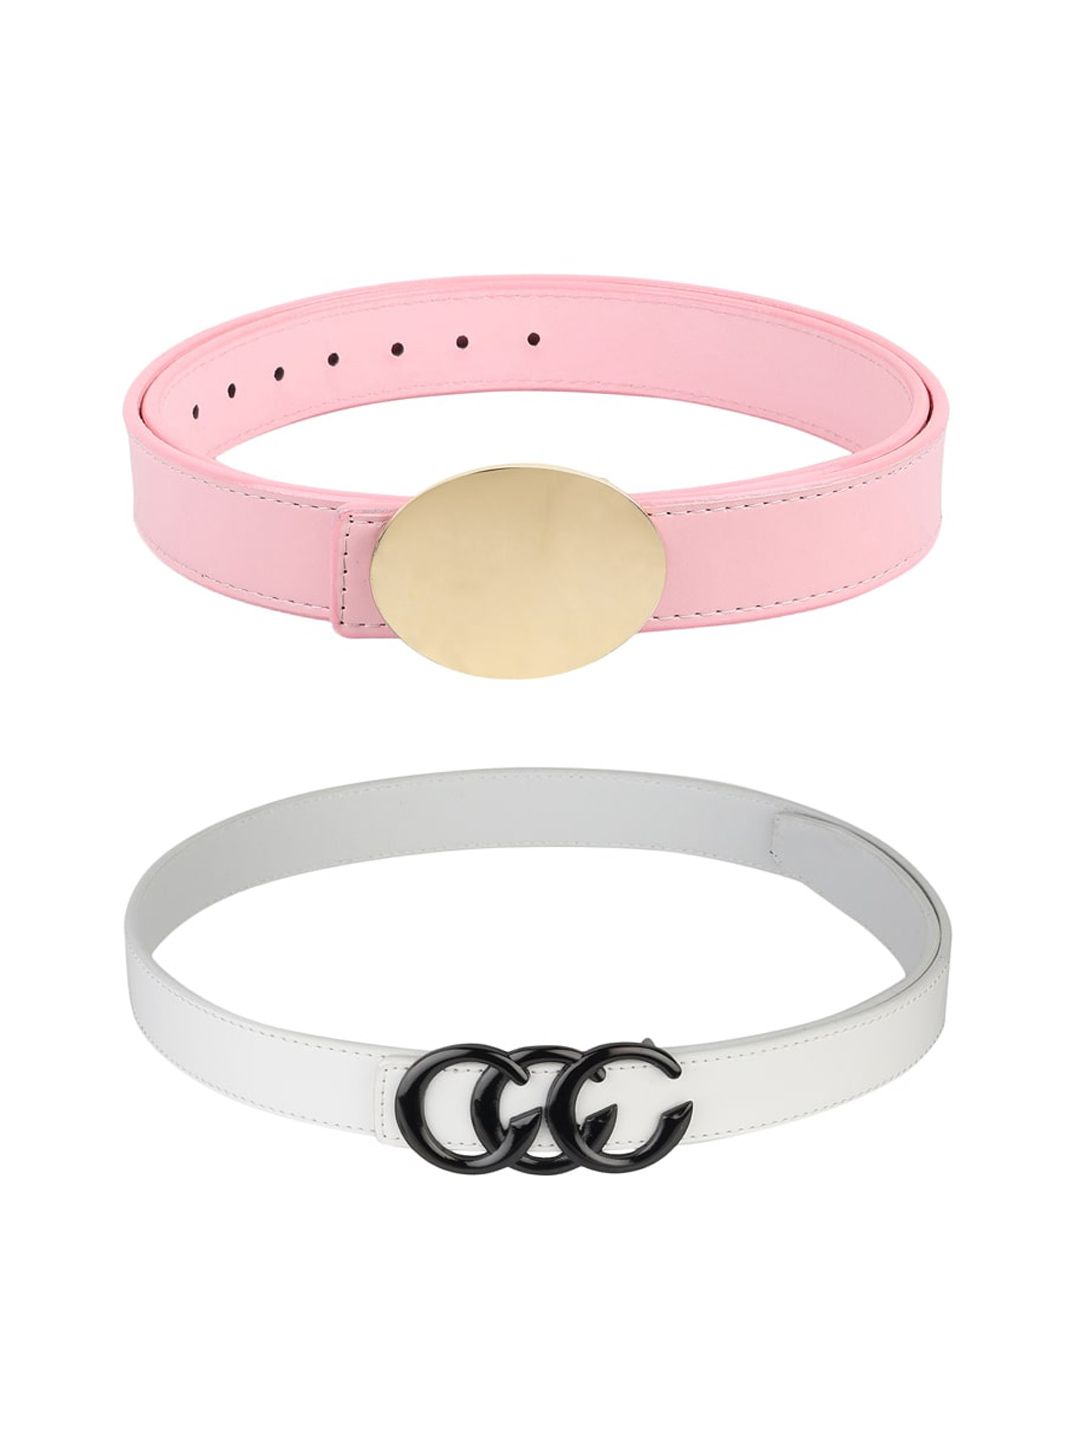 Kastner Women Set Of 2 Pink & White Synthetic Leather Belts Price in India